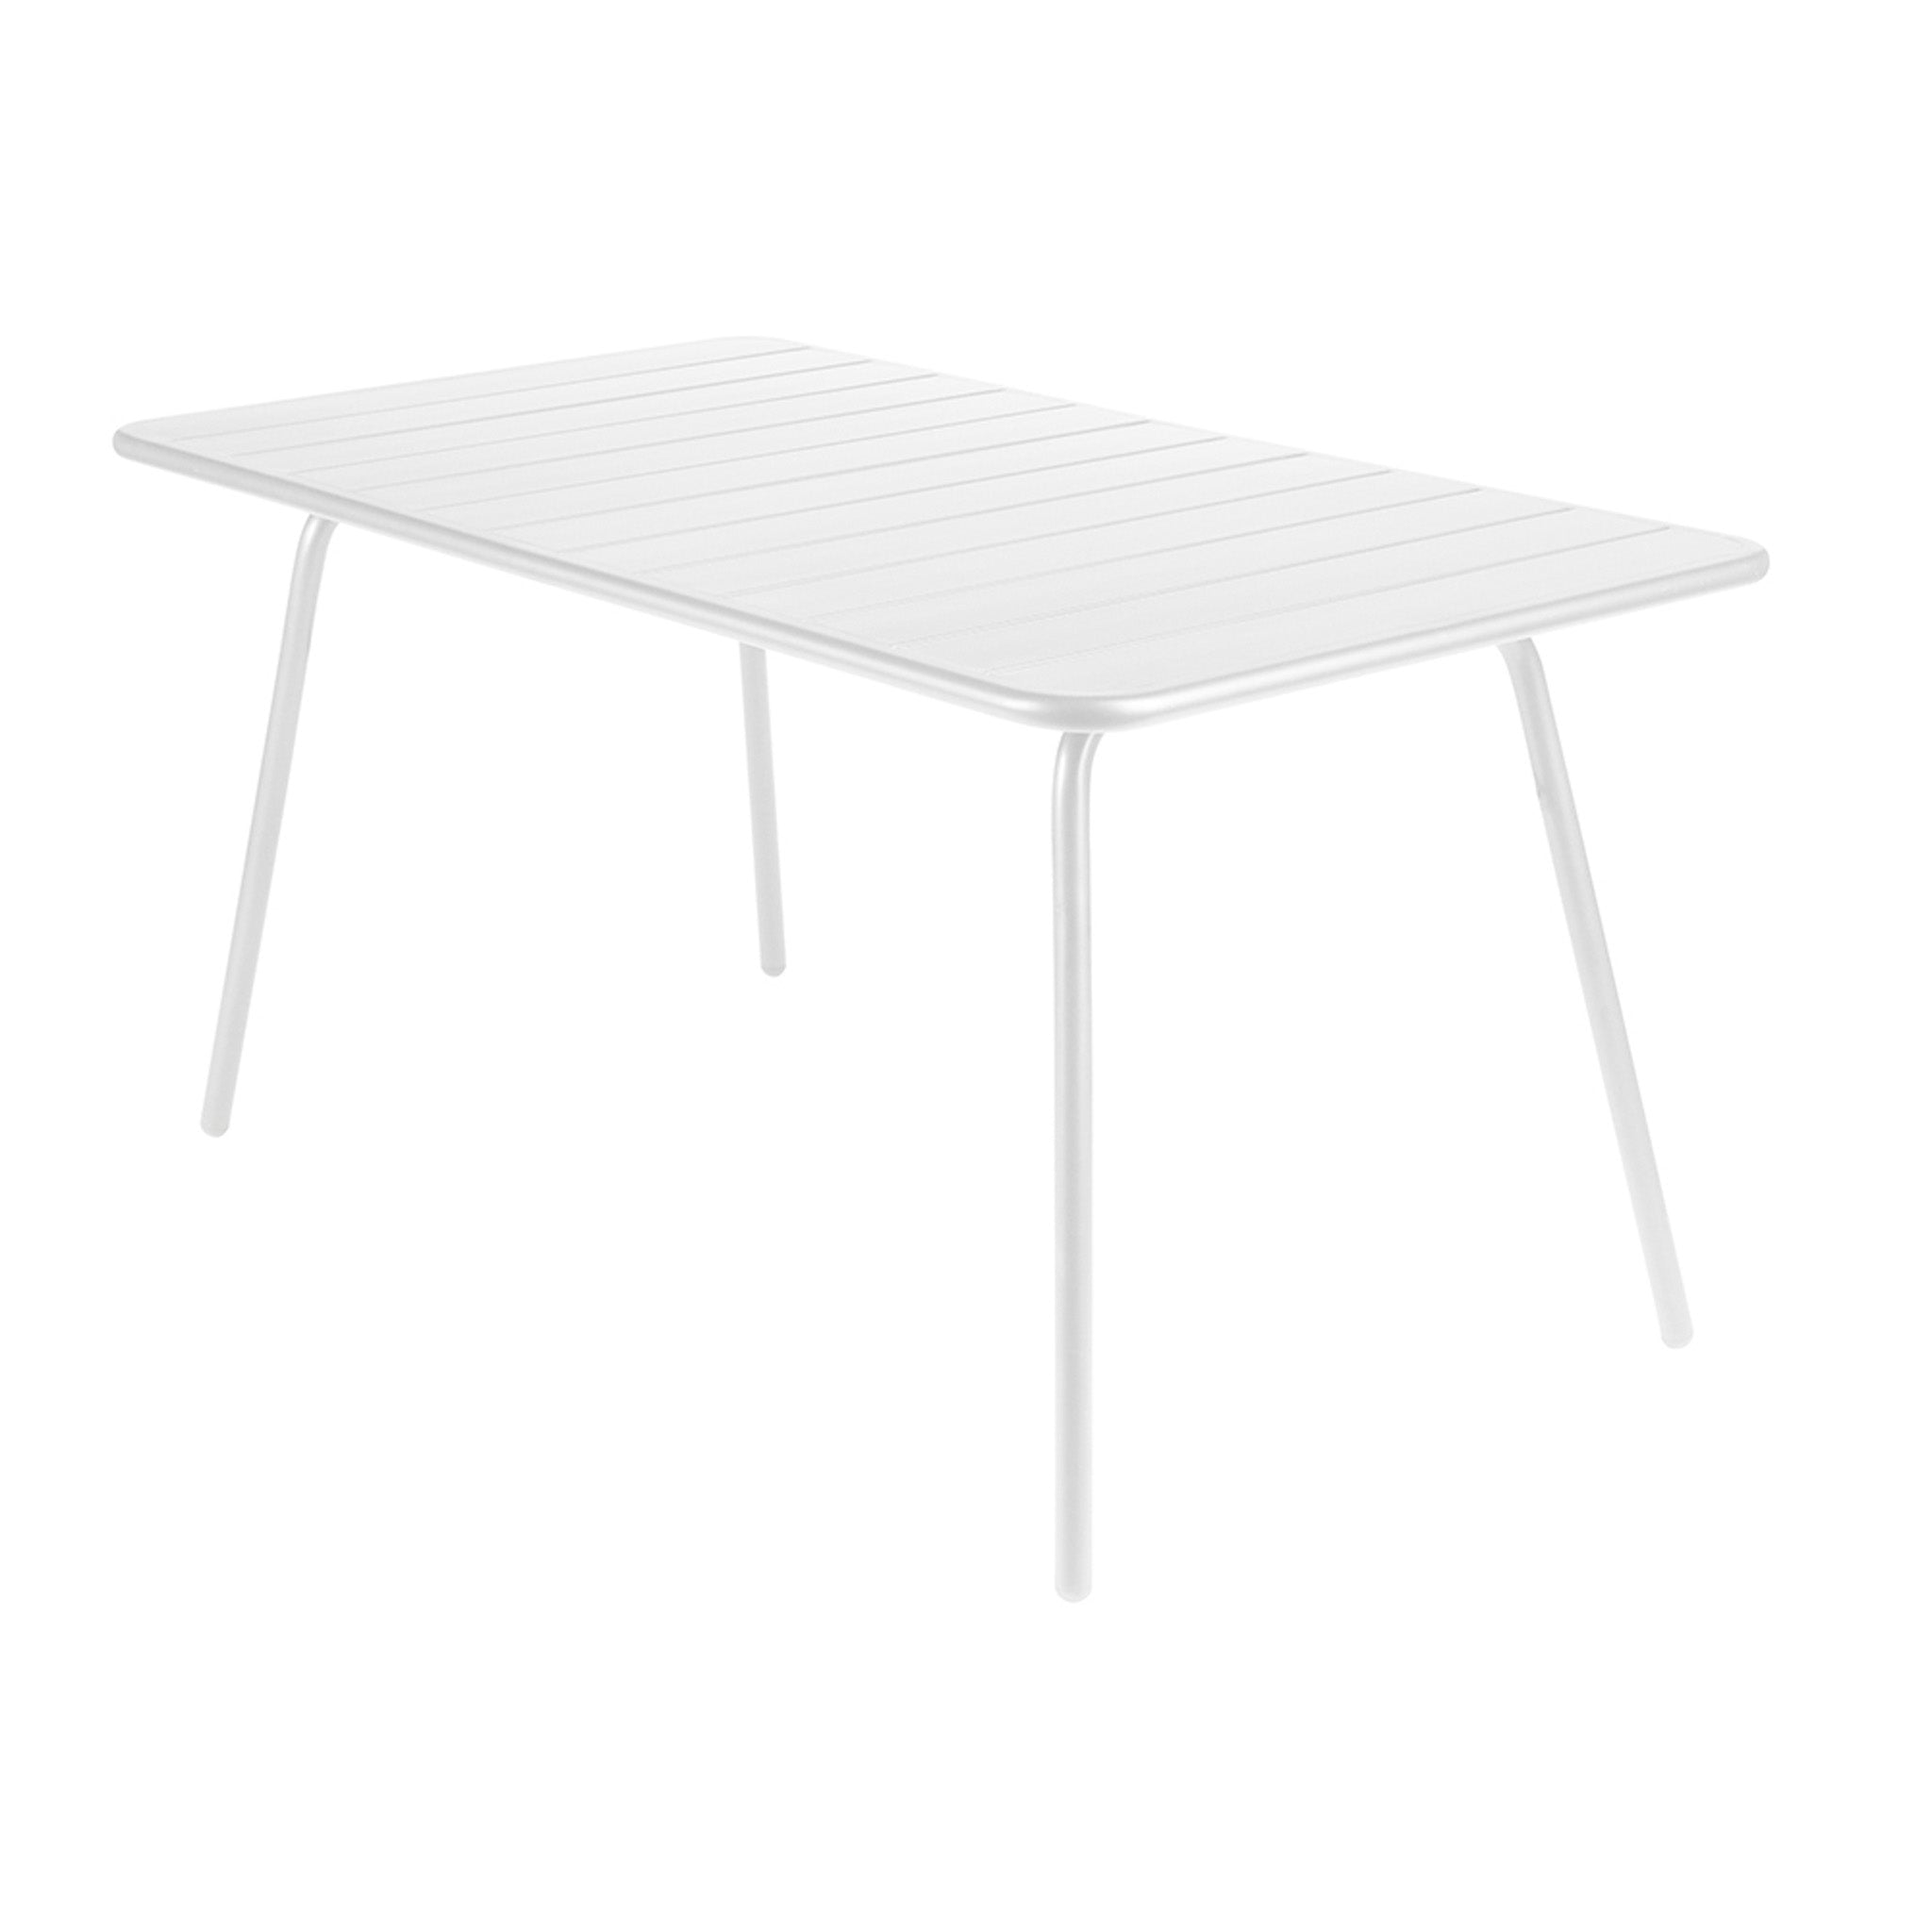 Clearance Luxembourg Rectangular Table / Small L143cm x D80cm / White by Fermob